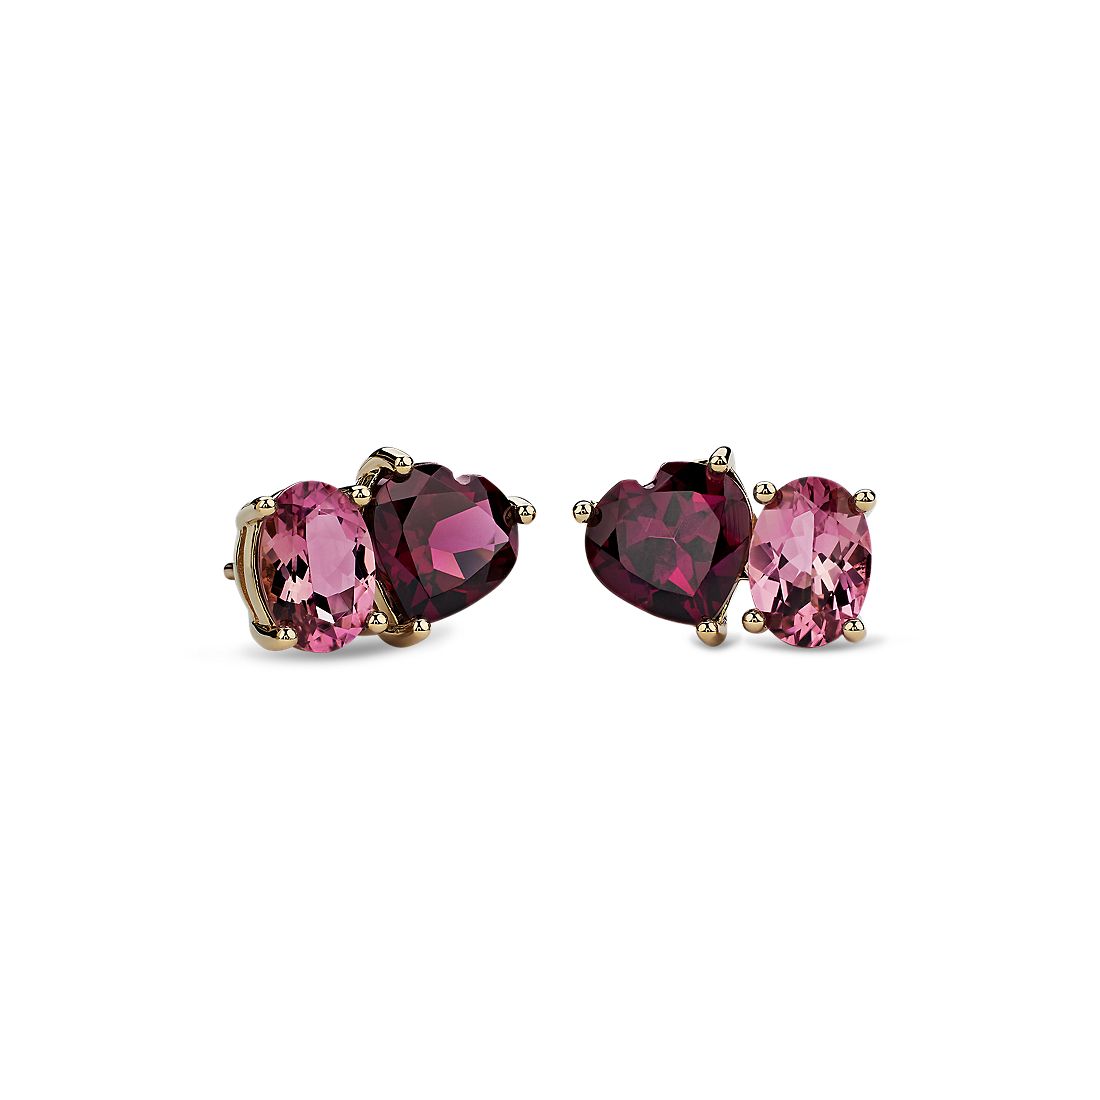 Pink Tourmaline and Rhodolite Two Stone Earrings in 14K Yellow Gold